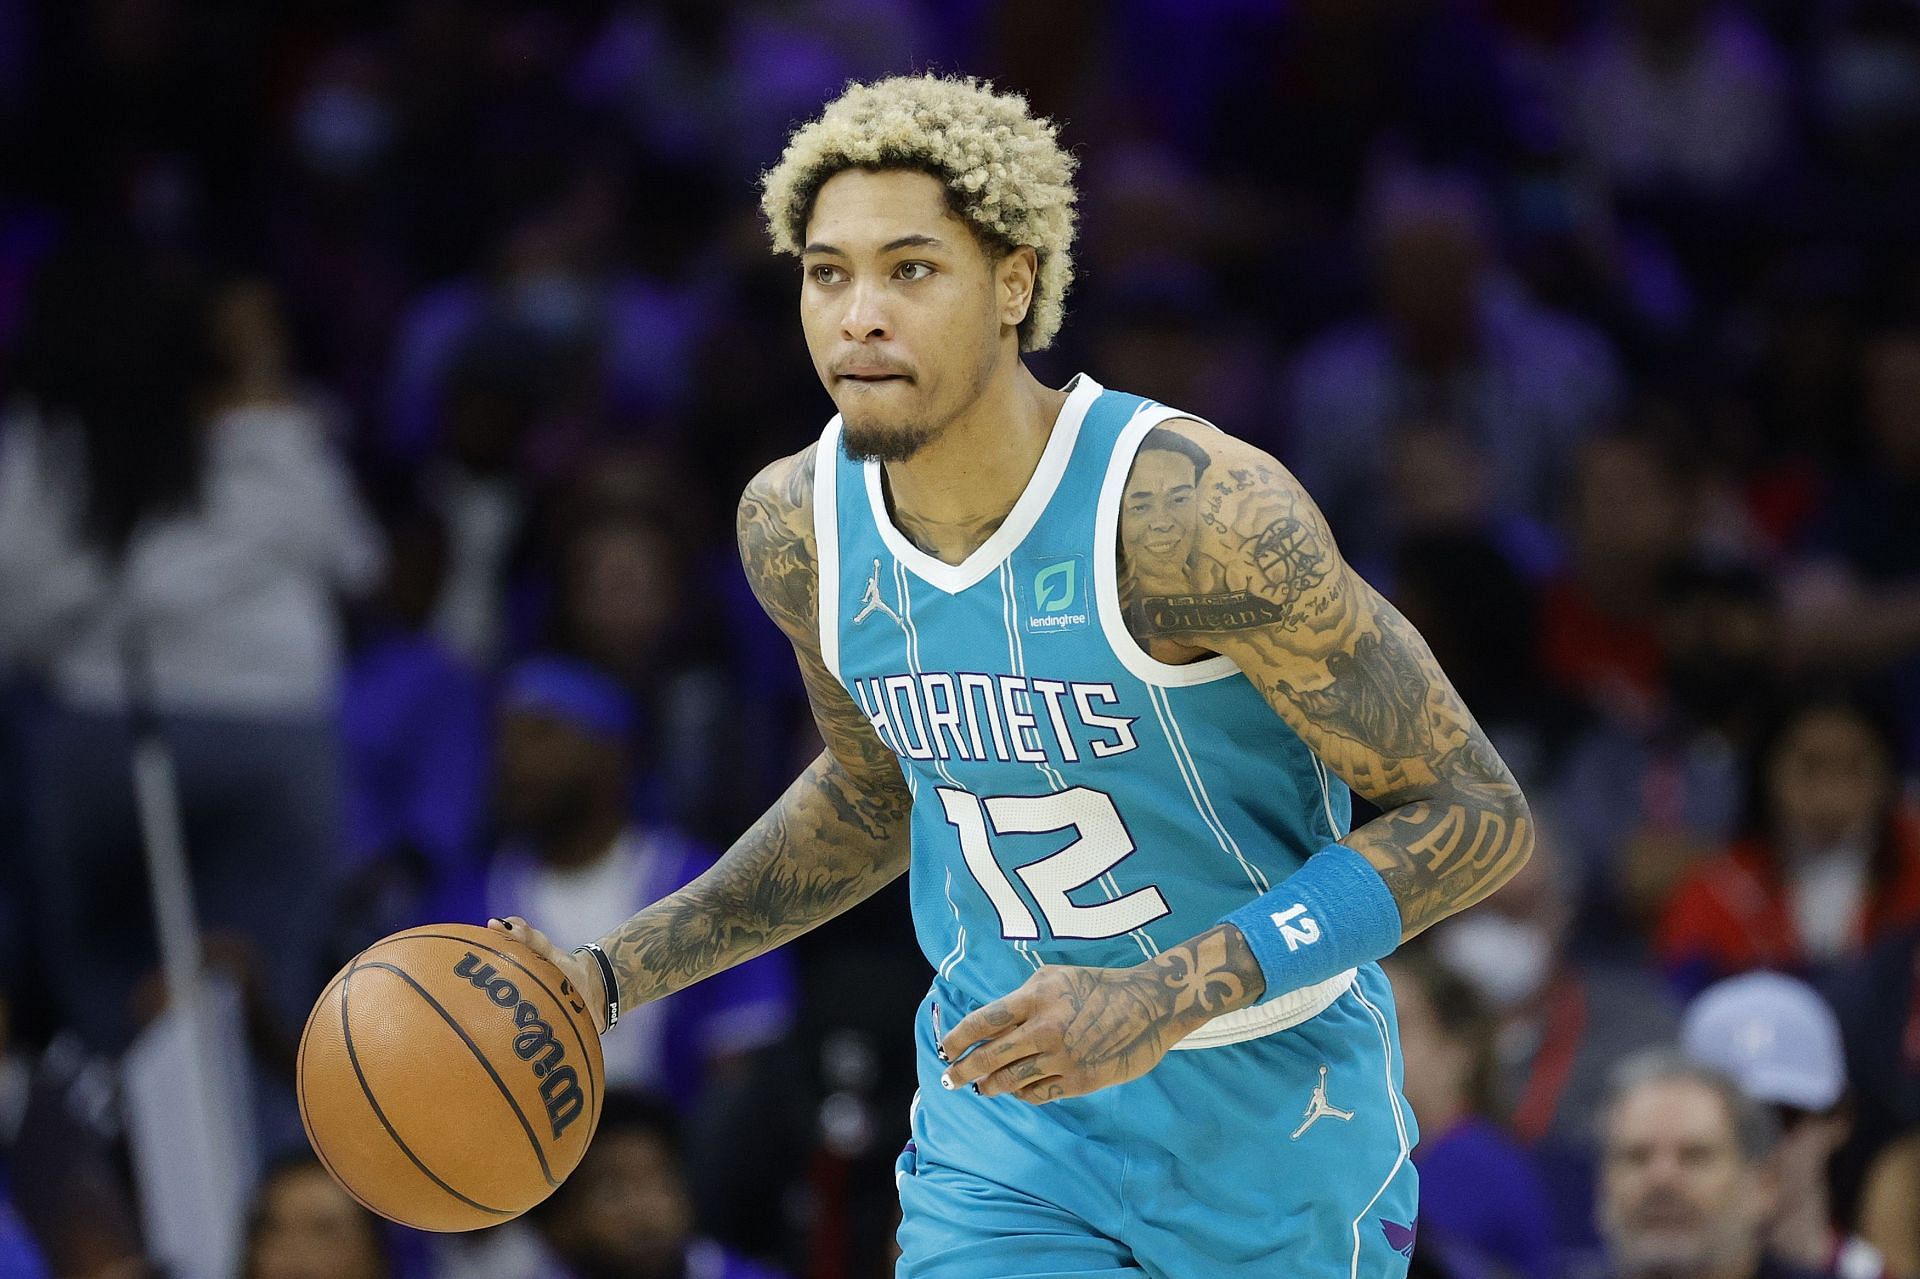 Kelly Oubre Jr. of the Charlotte Hornets was one of the best players off the bench in the NBA last season.